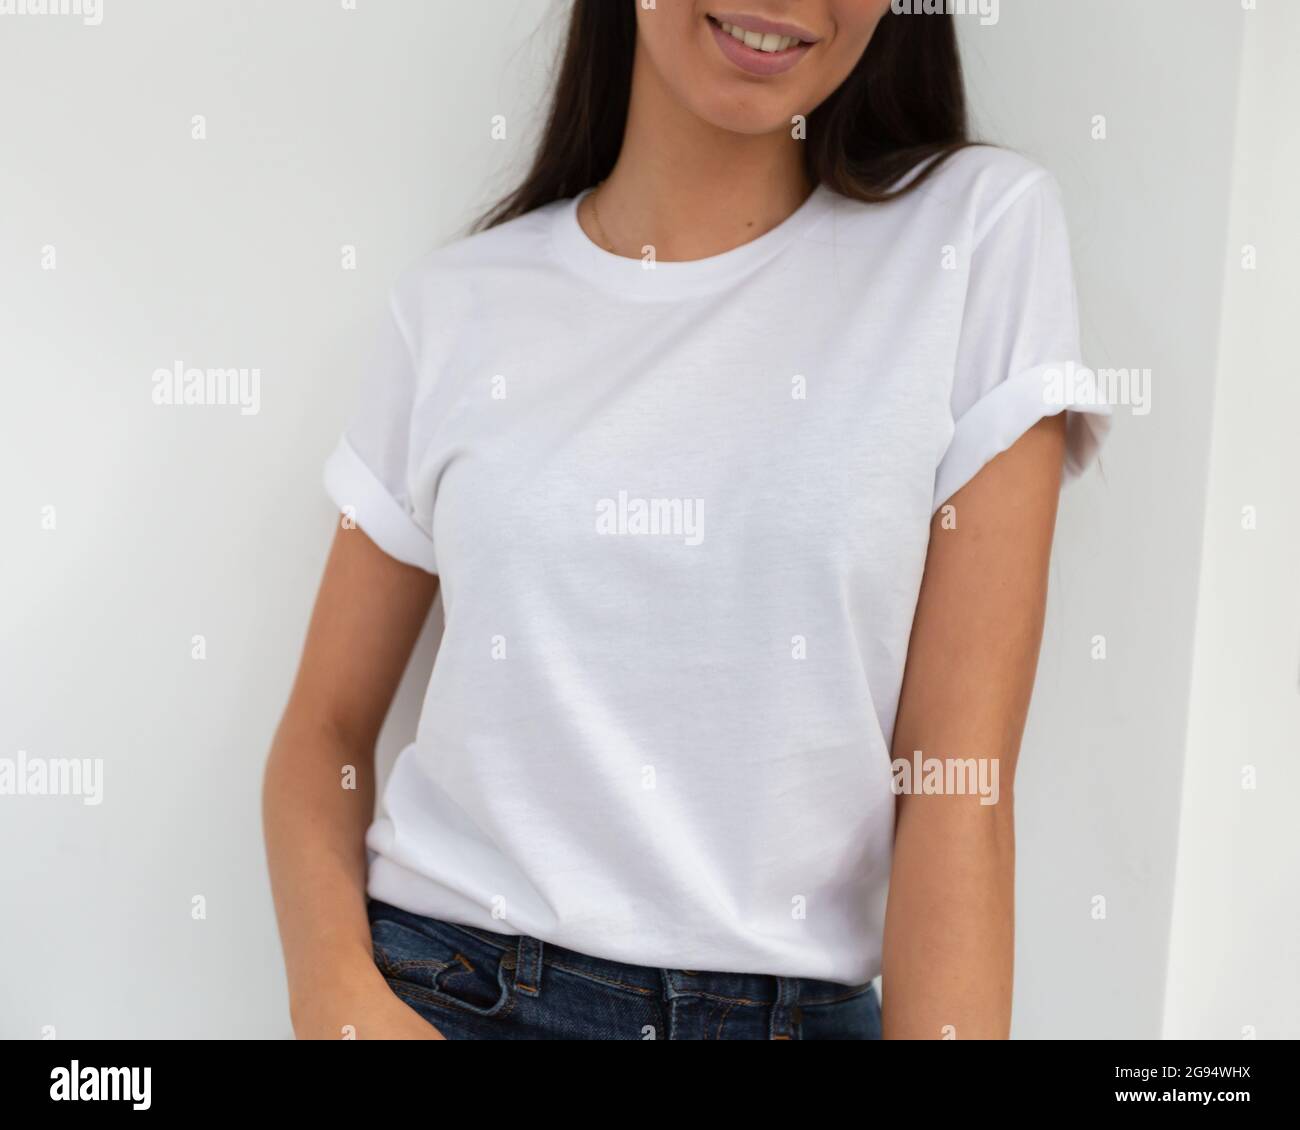 Tshirt mockup, front view of unrecognizable woman wearing white tshirt. Copy space on empty area on her t-shirt for design or inscription. Fashion lifestyle mock up of white tshirt. T-shirt template. Stock Photo